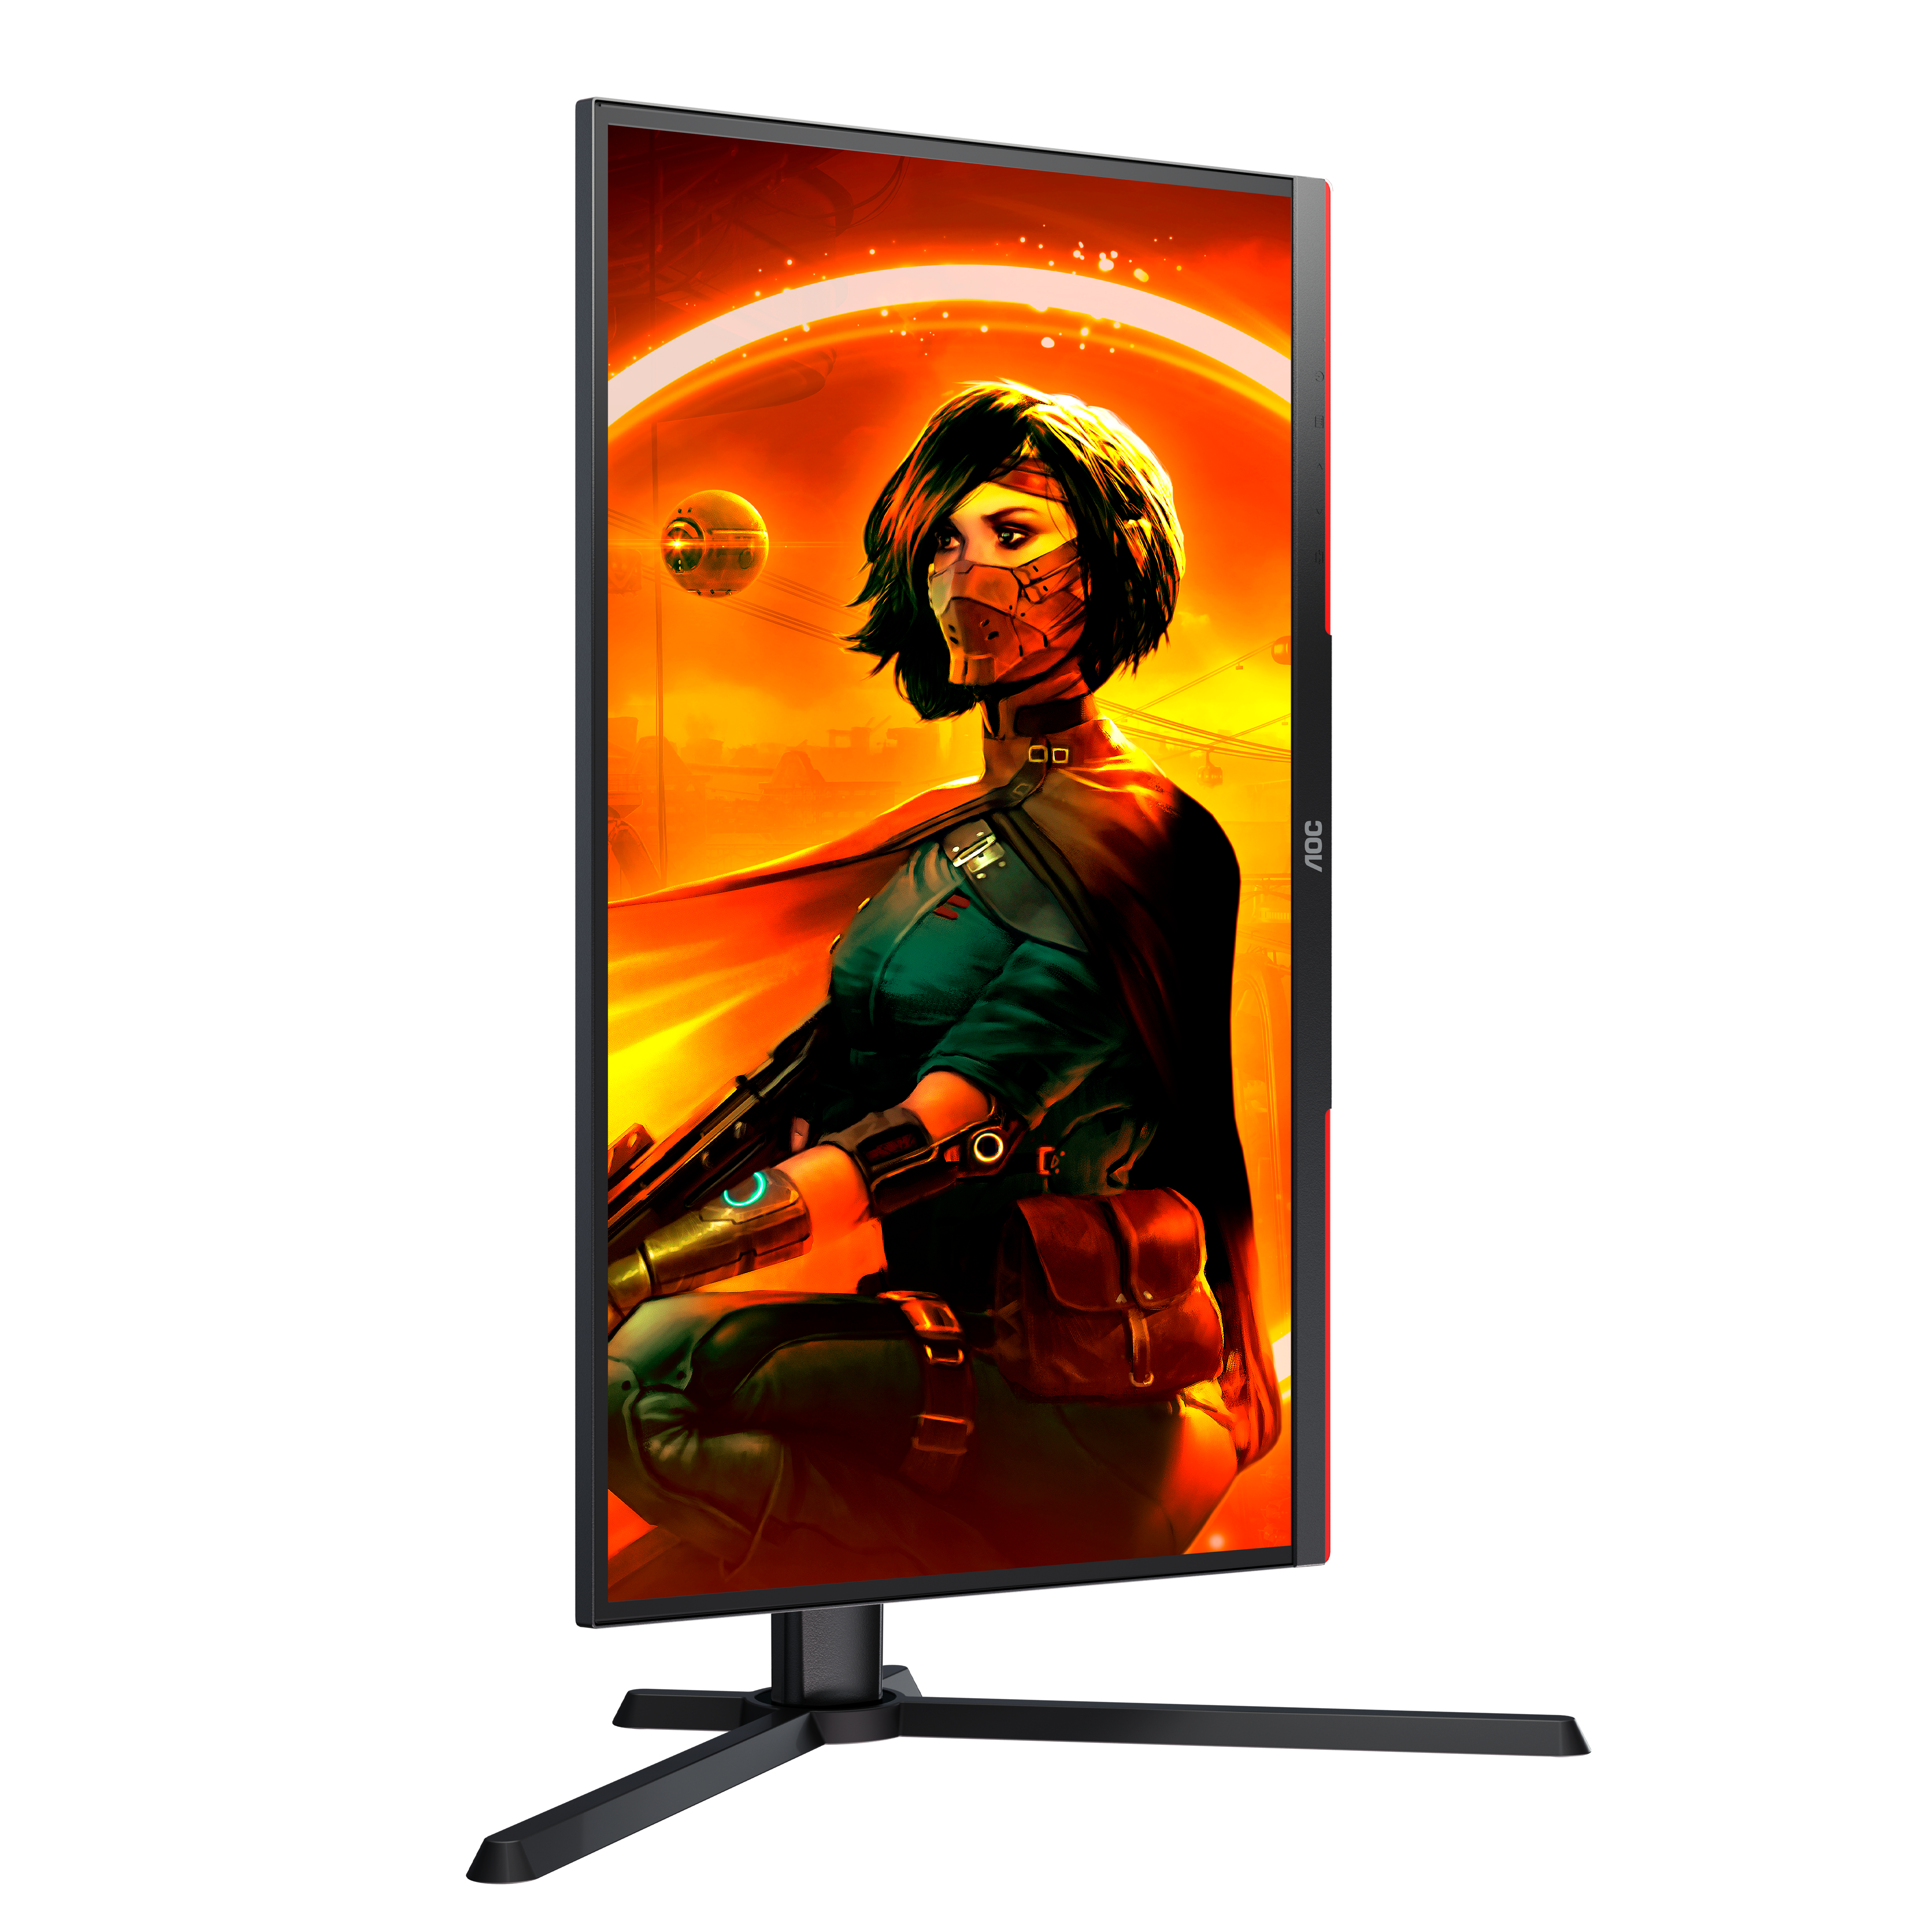 AOC Gaming 25G3ZM/BK monitor with 240Hz refresh rate, 1ms GtG response time  launched - Gizmochina